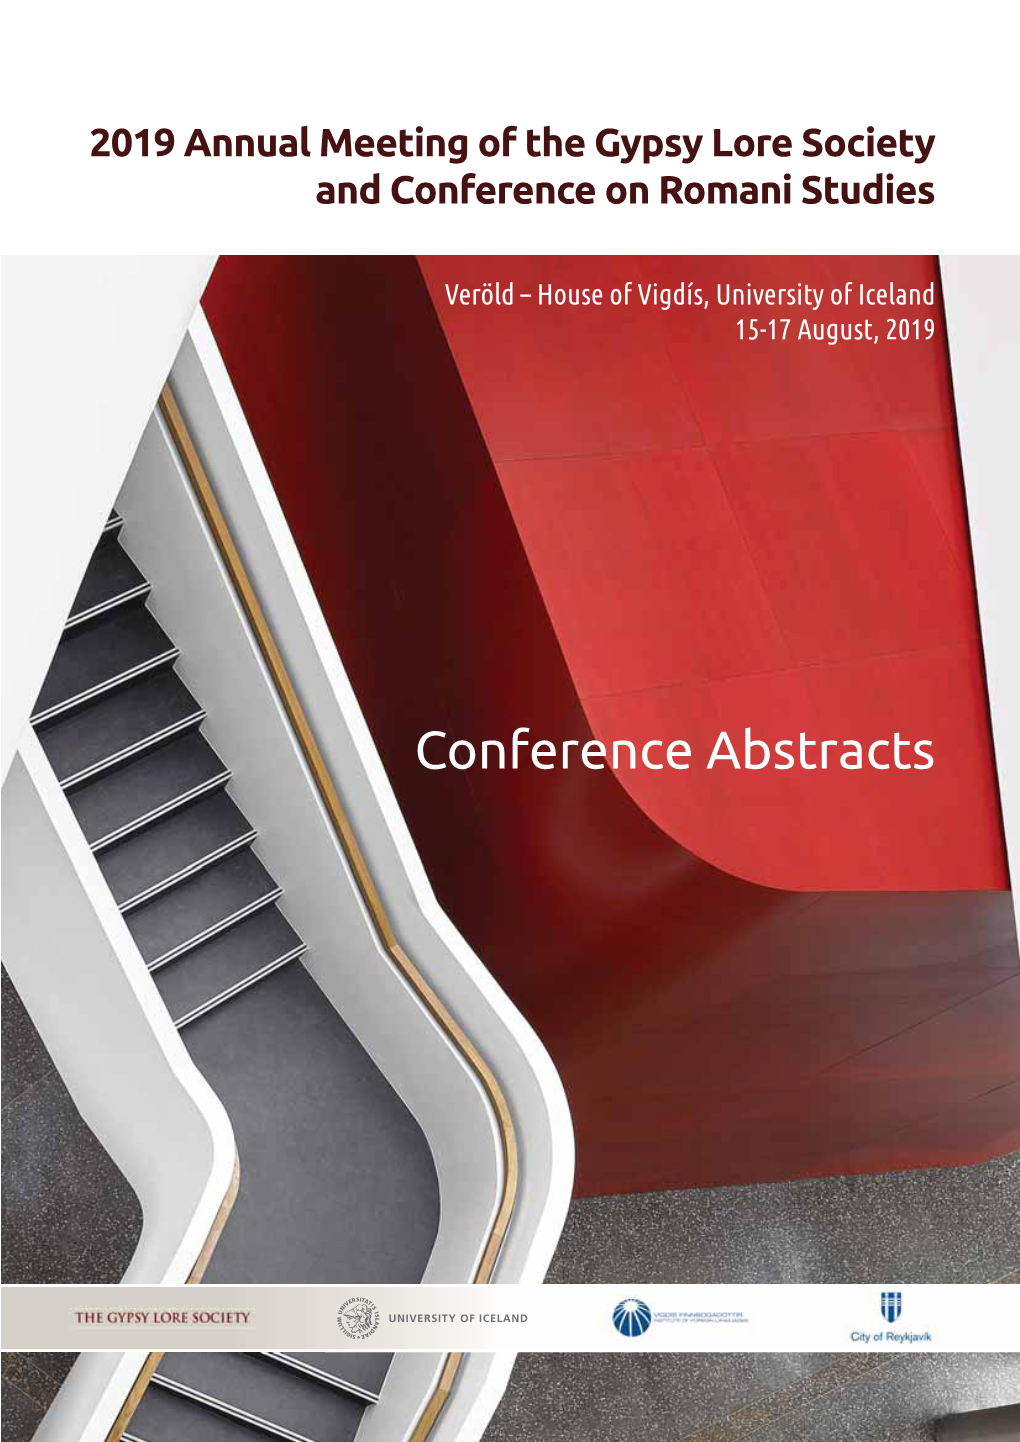 Final-Gls-Conference-Abstracts-1.Pdf